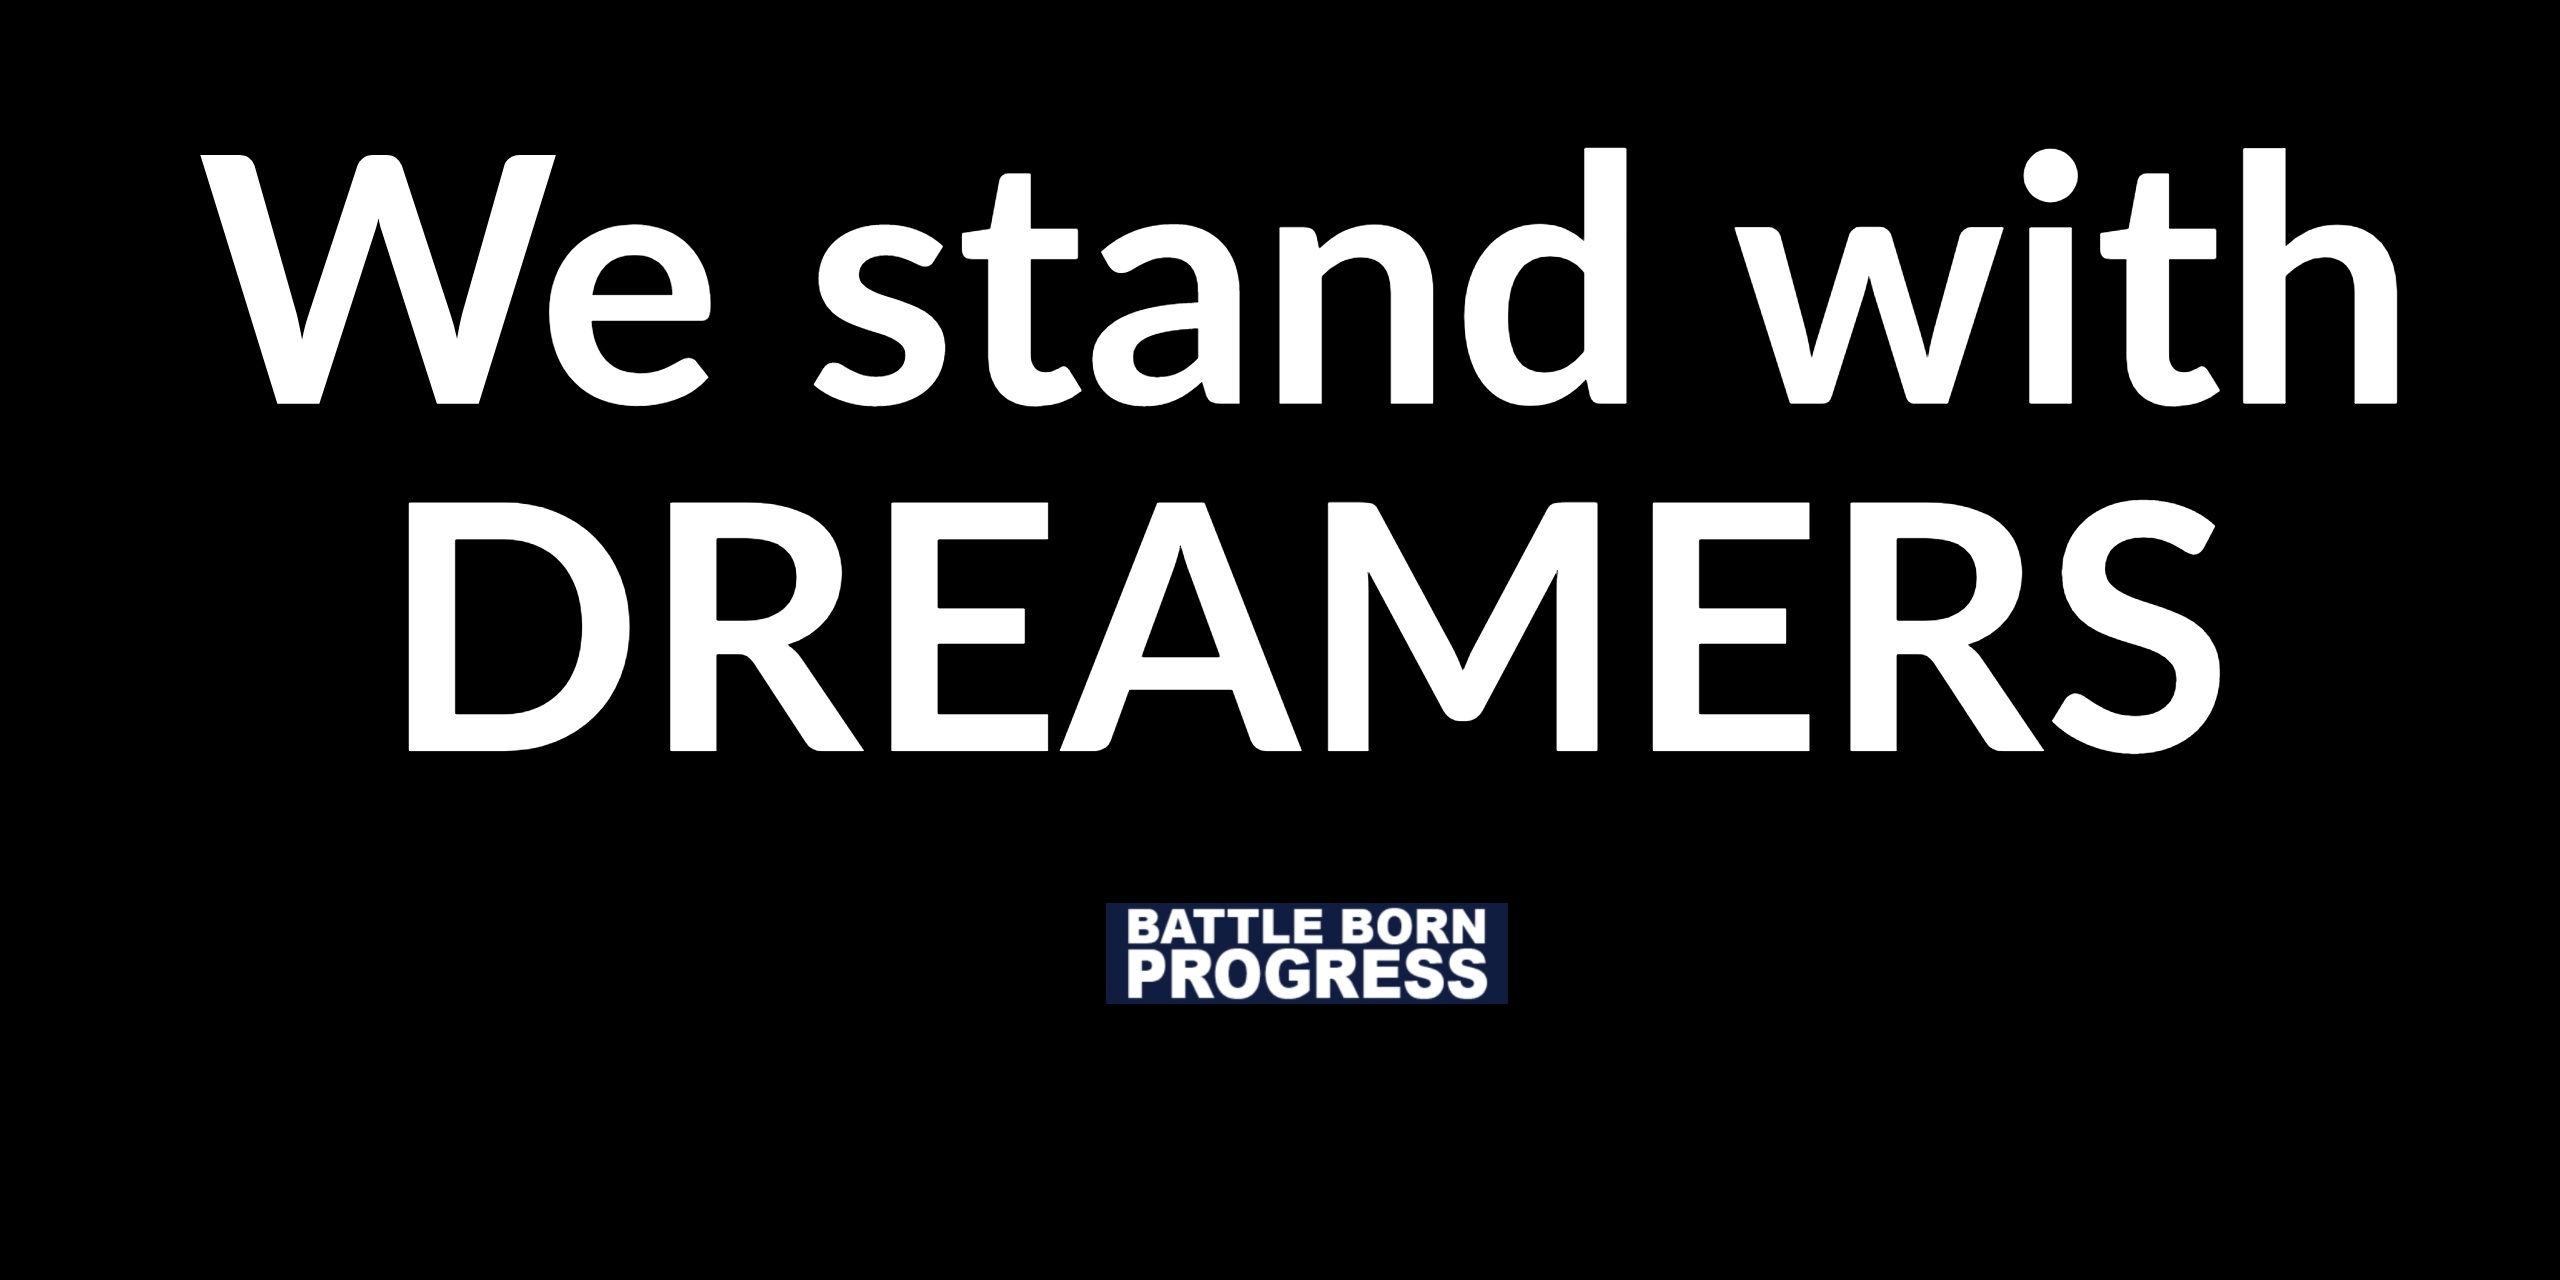 Battle Born Progress | We Stand With Dreamers